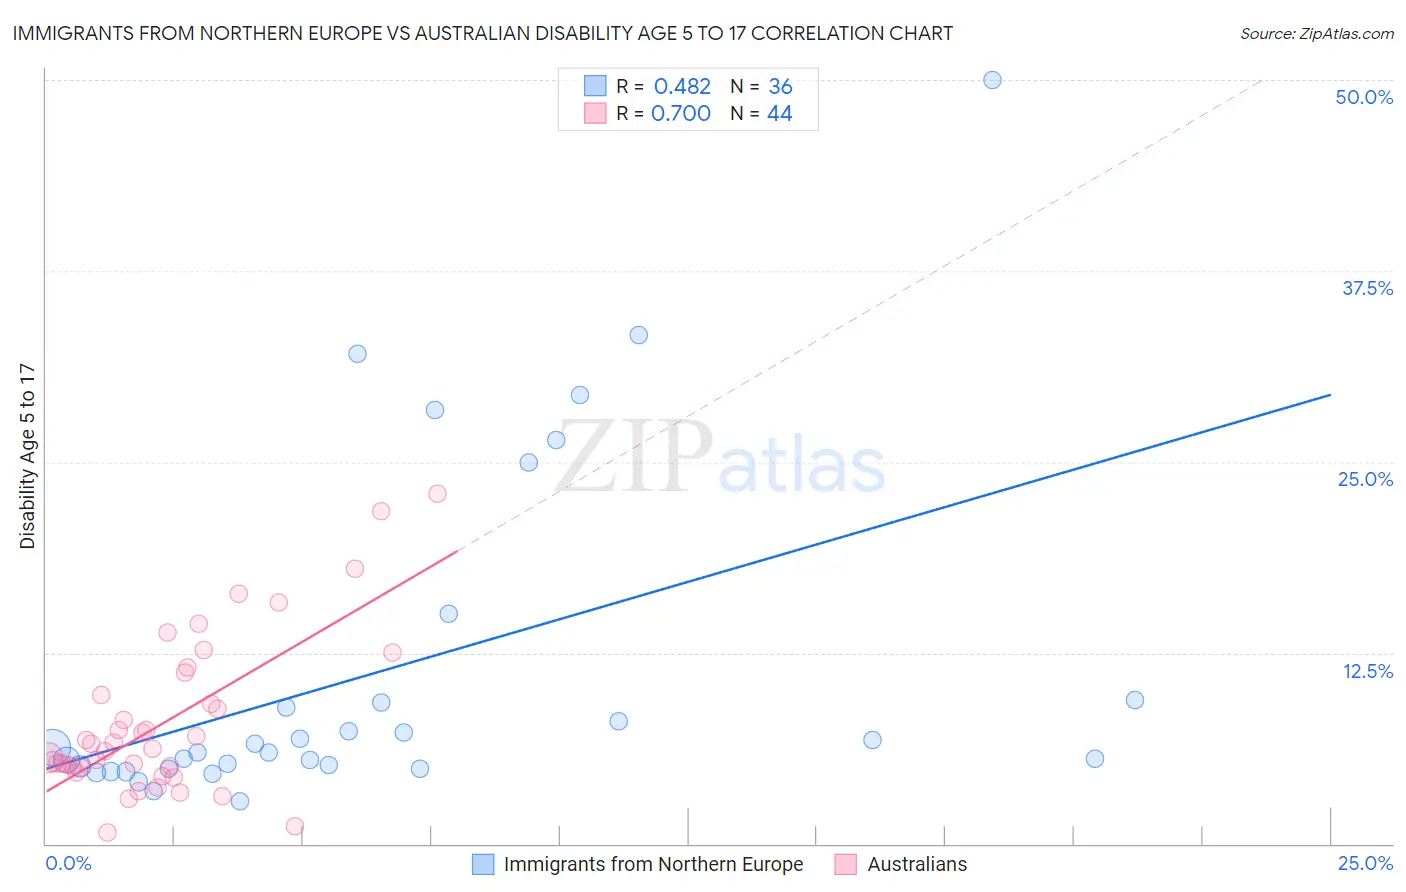 Immigrants from Northern Europe vs Australian Disability Age 5 to 17